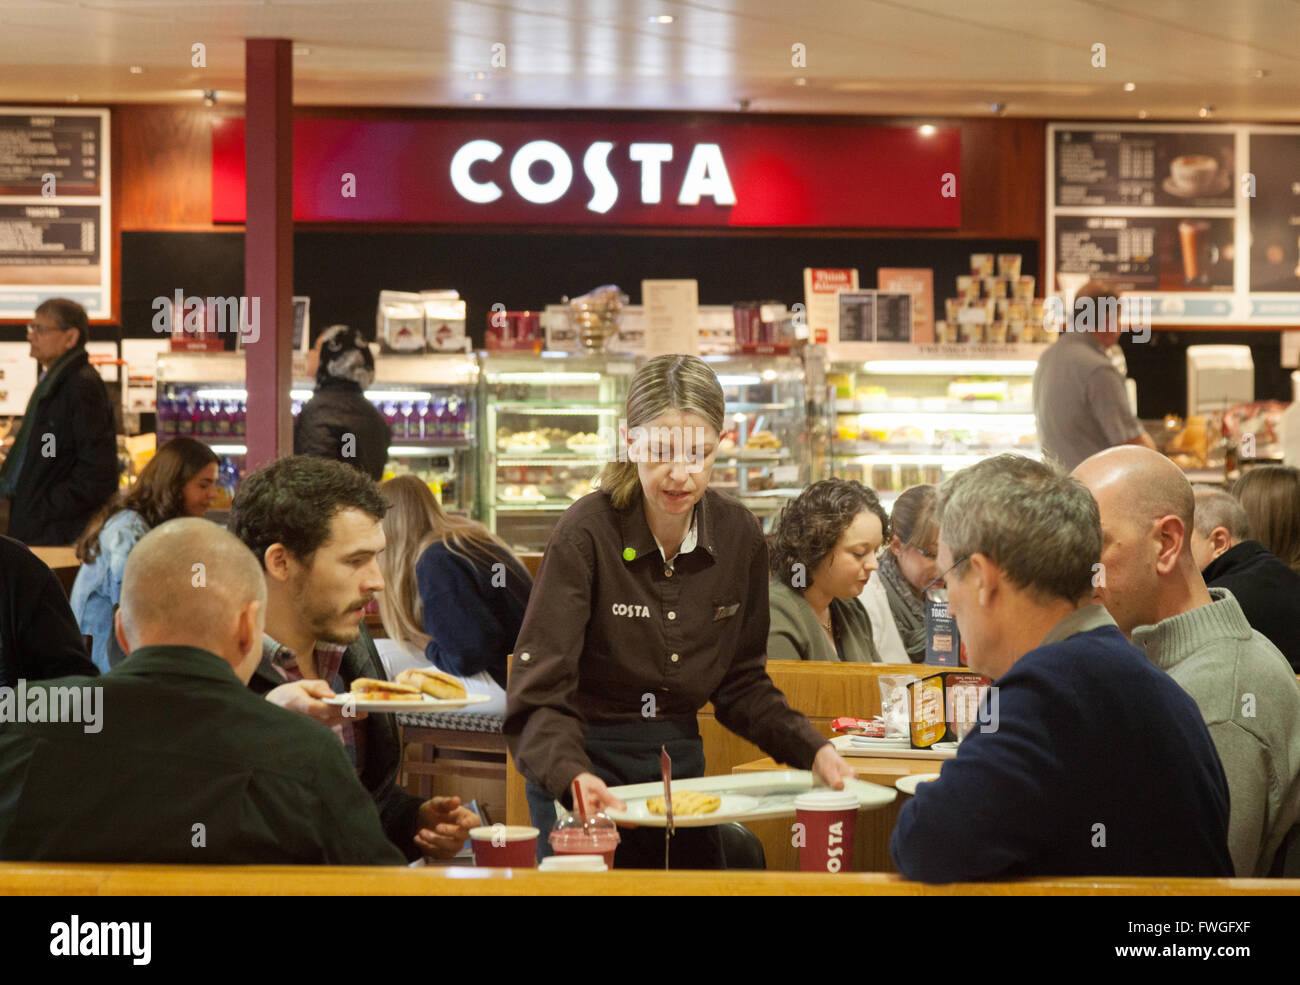 Costa Coffee staff waitress serving coffee and food, Costa Coffee, South Mimms motorway service station, M25, London UK Stock Photo